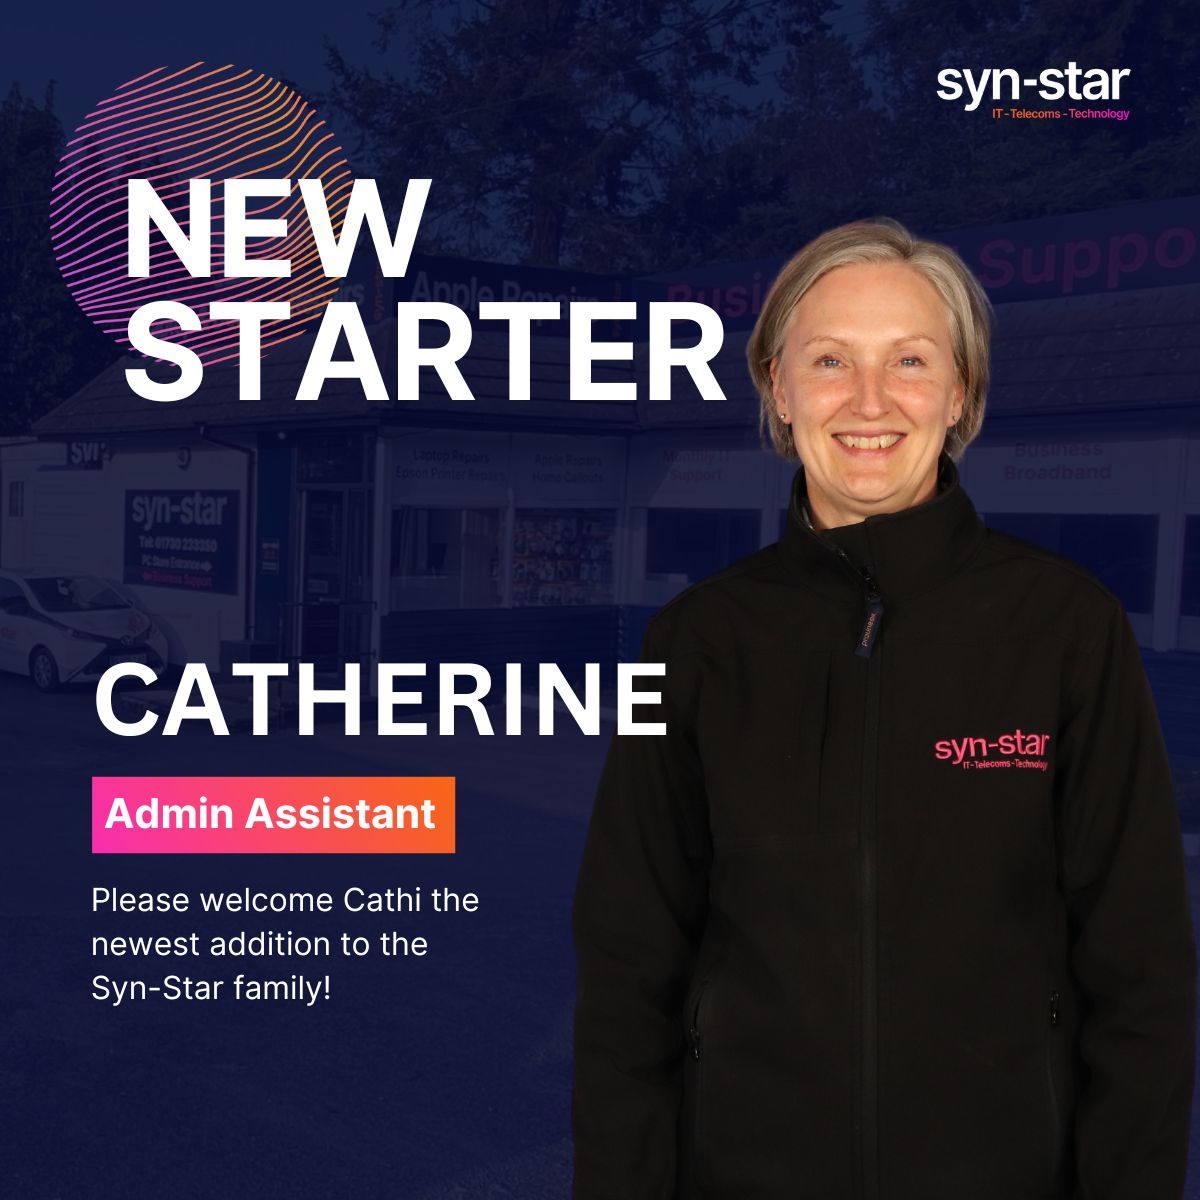 🎉🌟 Let's give a warm welcome to Cathi, the newest addition to the Syn-Star family! 🌟🎉

💙 #WelcomeCathi #NewTeamMember #SynStarFamily #SynStar #NewStarter